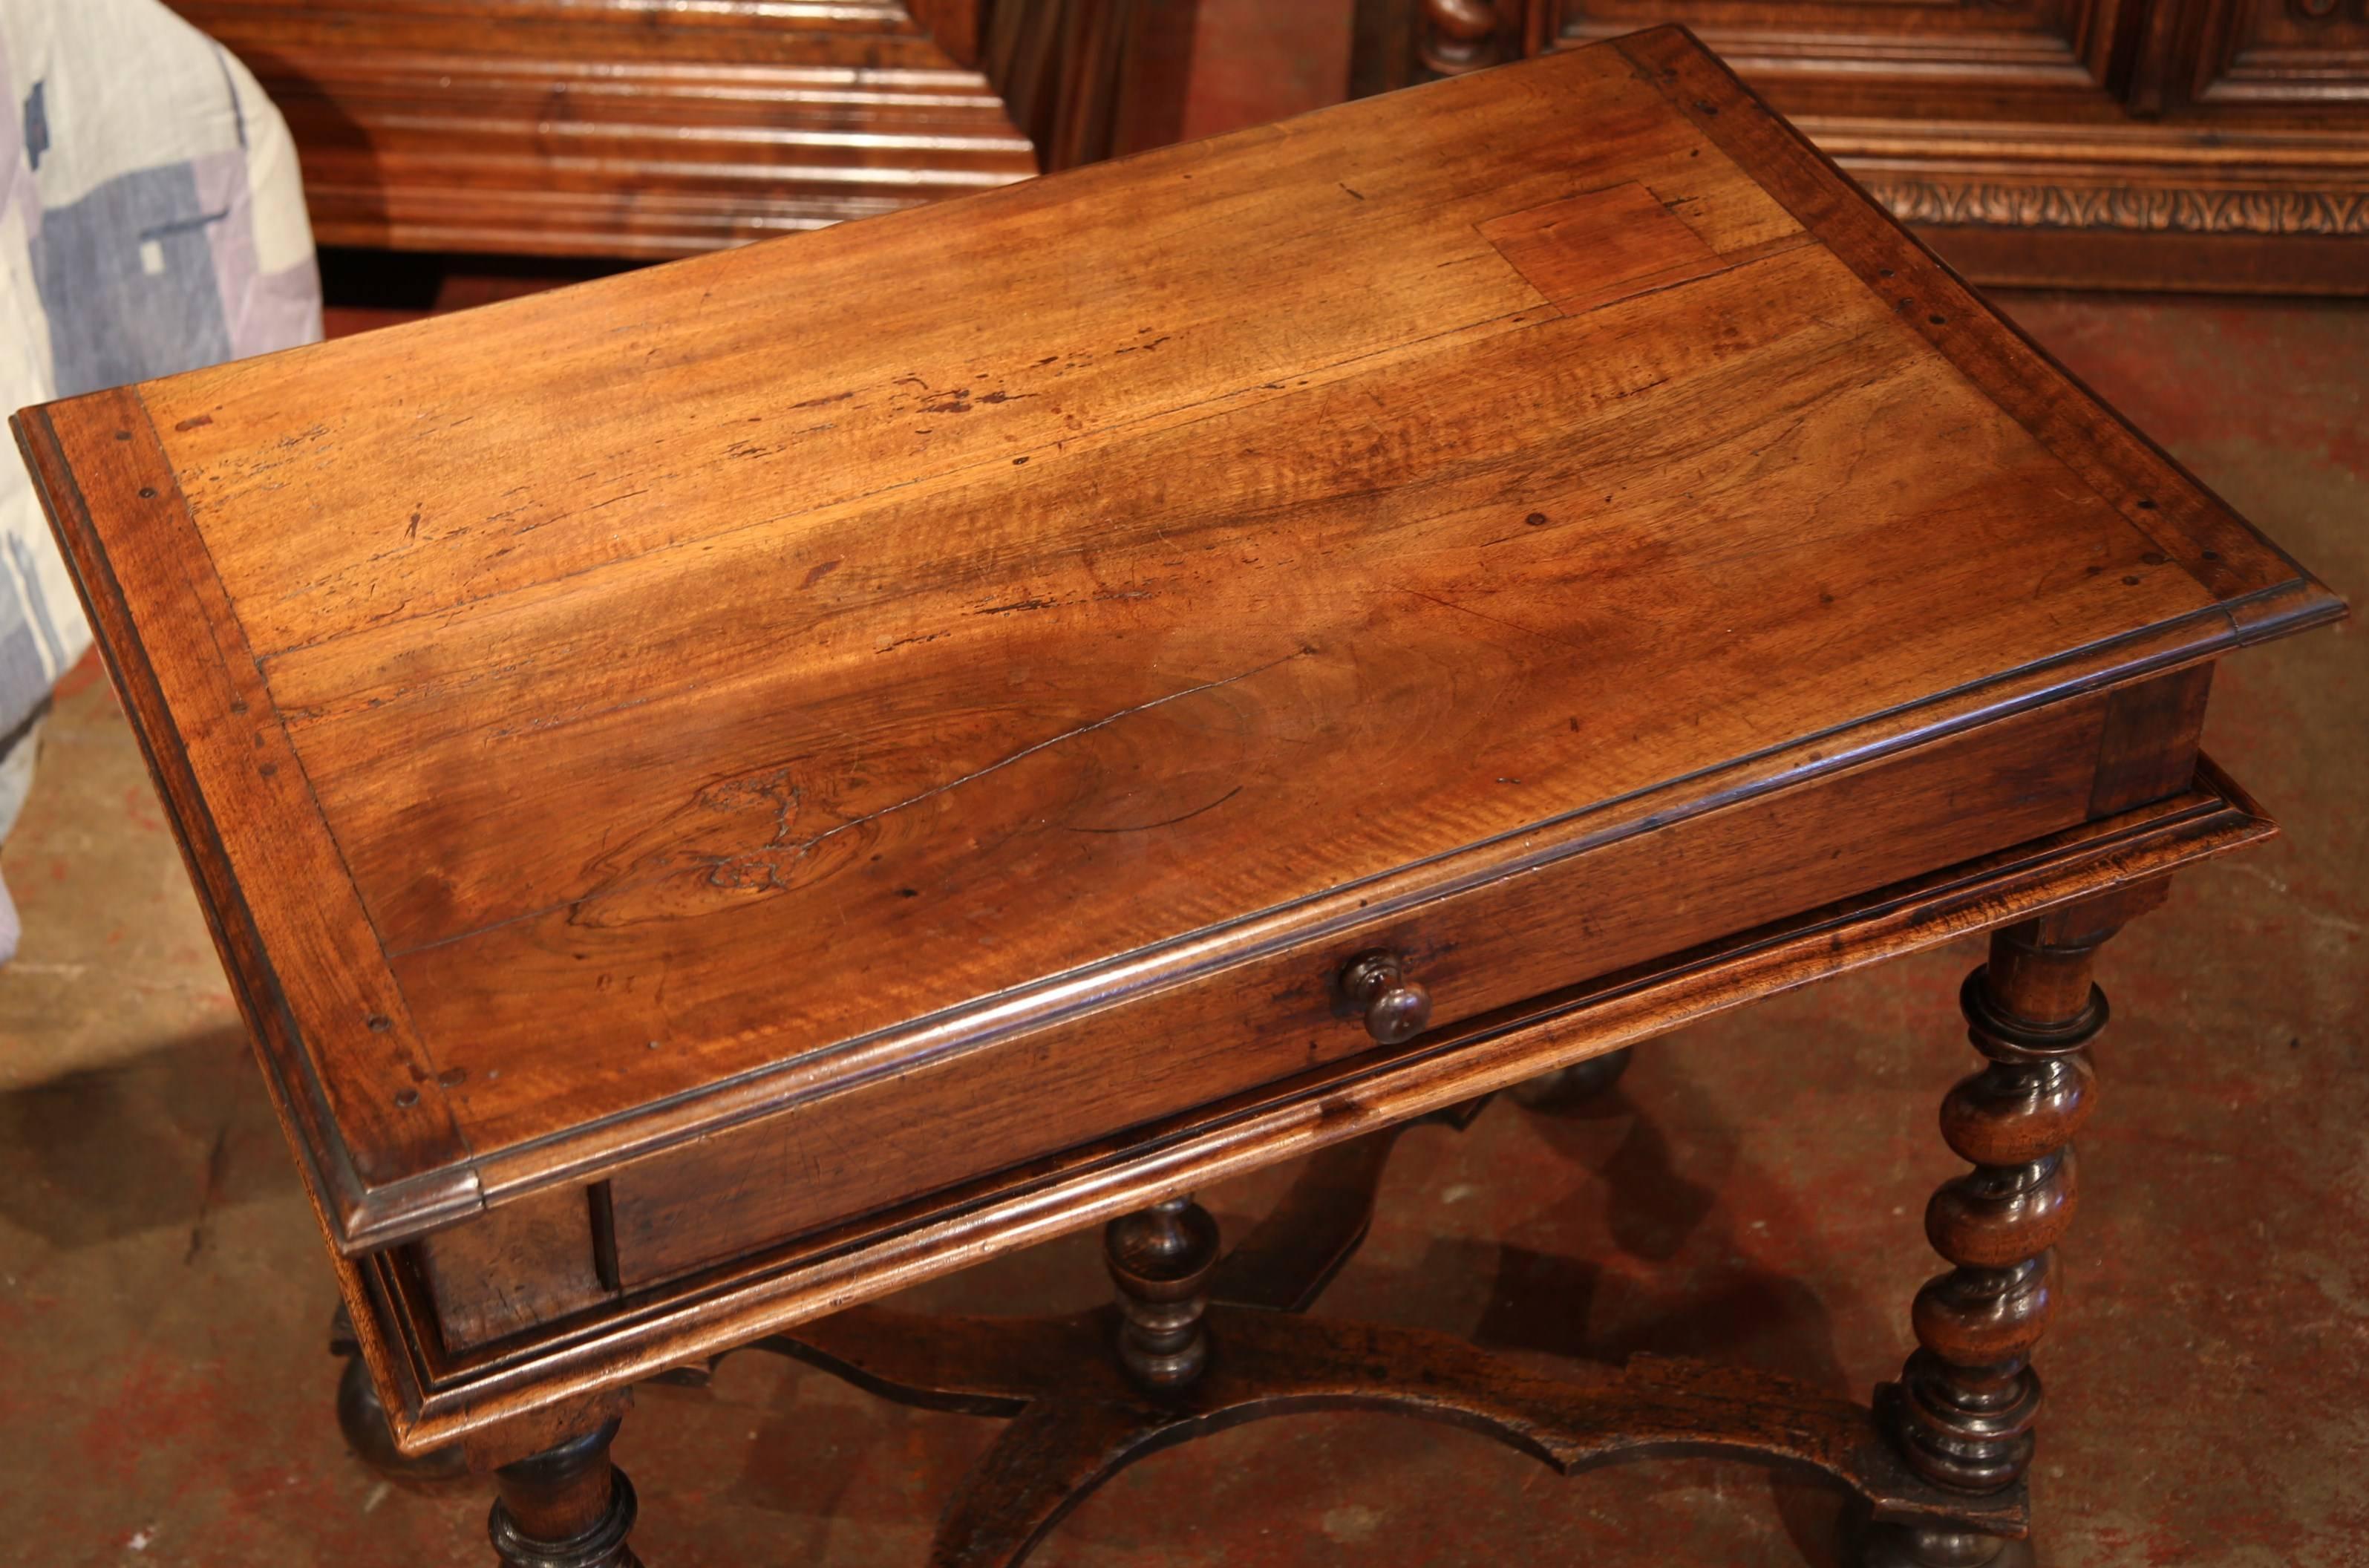 Incorporate extra, functional surface space into your living room with this elegant fruit wood end table. Crafted in the Perigord region of France circa 1790, this small desk features a single drawer across the front with a wooden knob. The writing